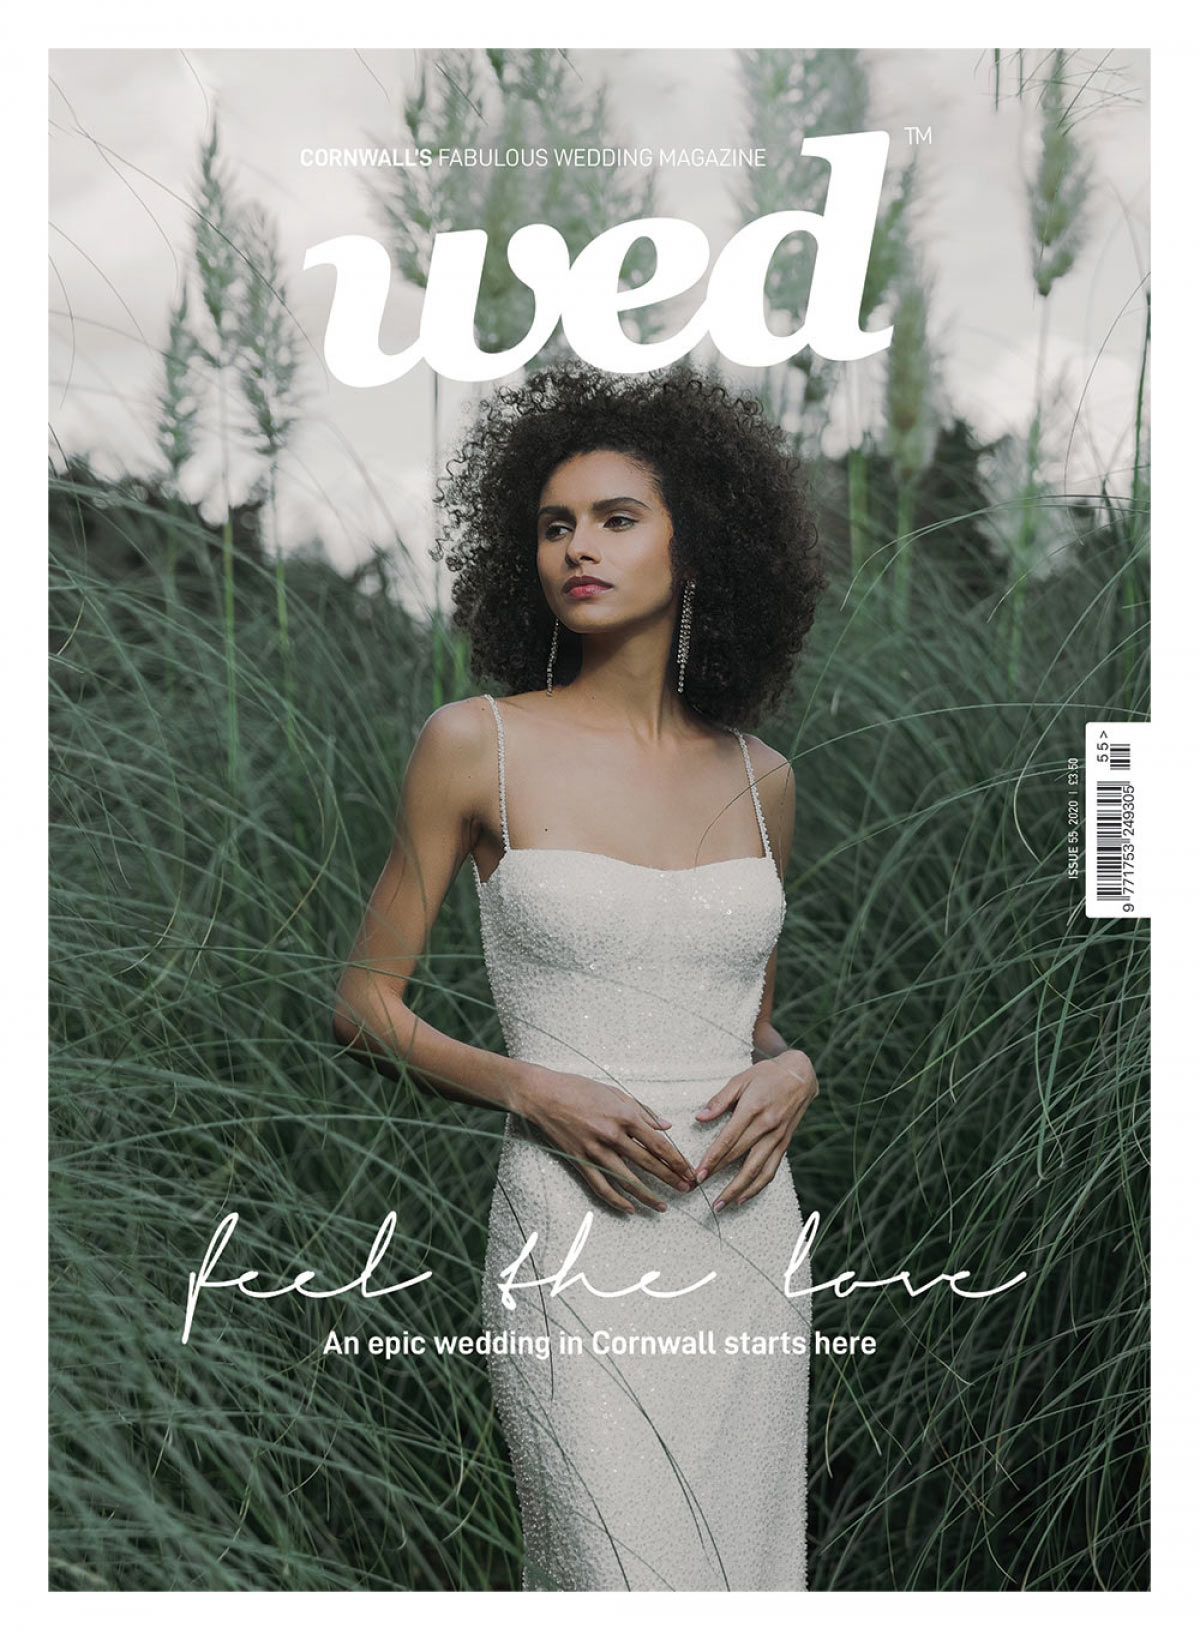 Order the new Cornwall issue!